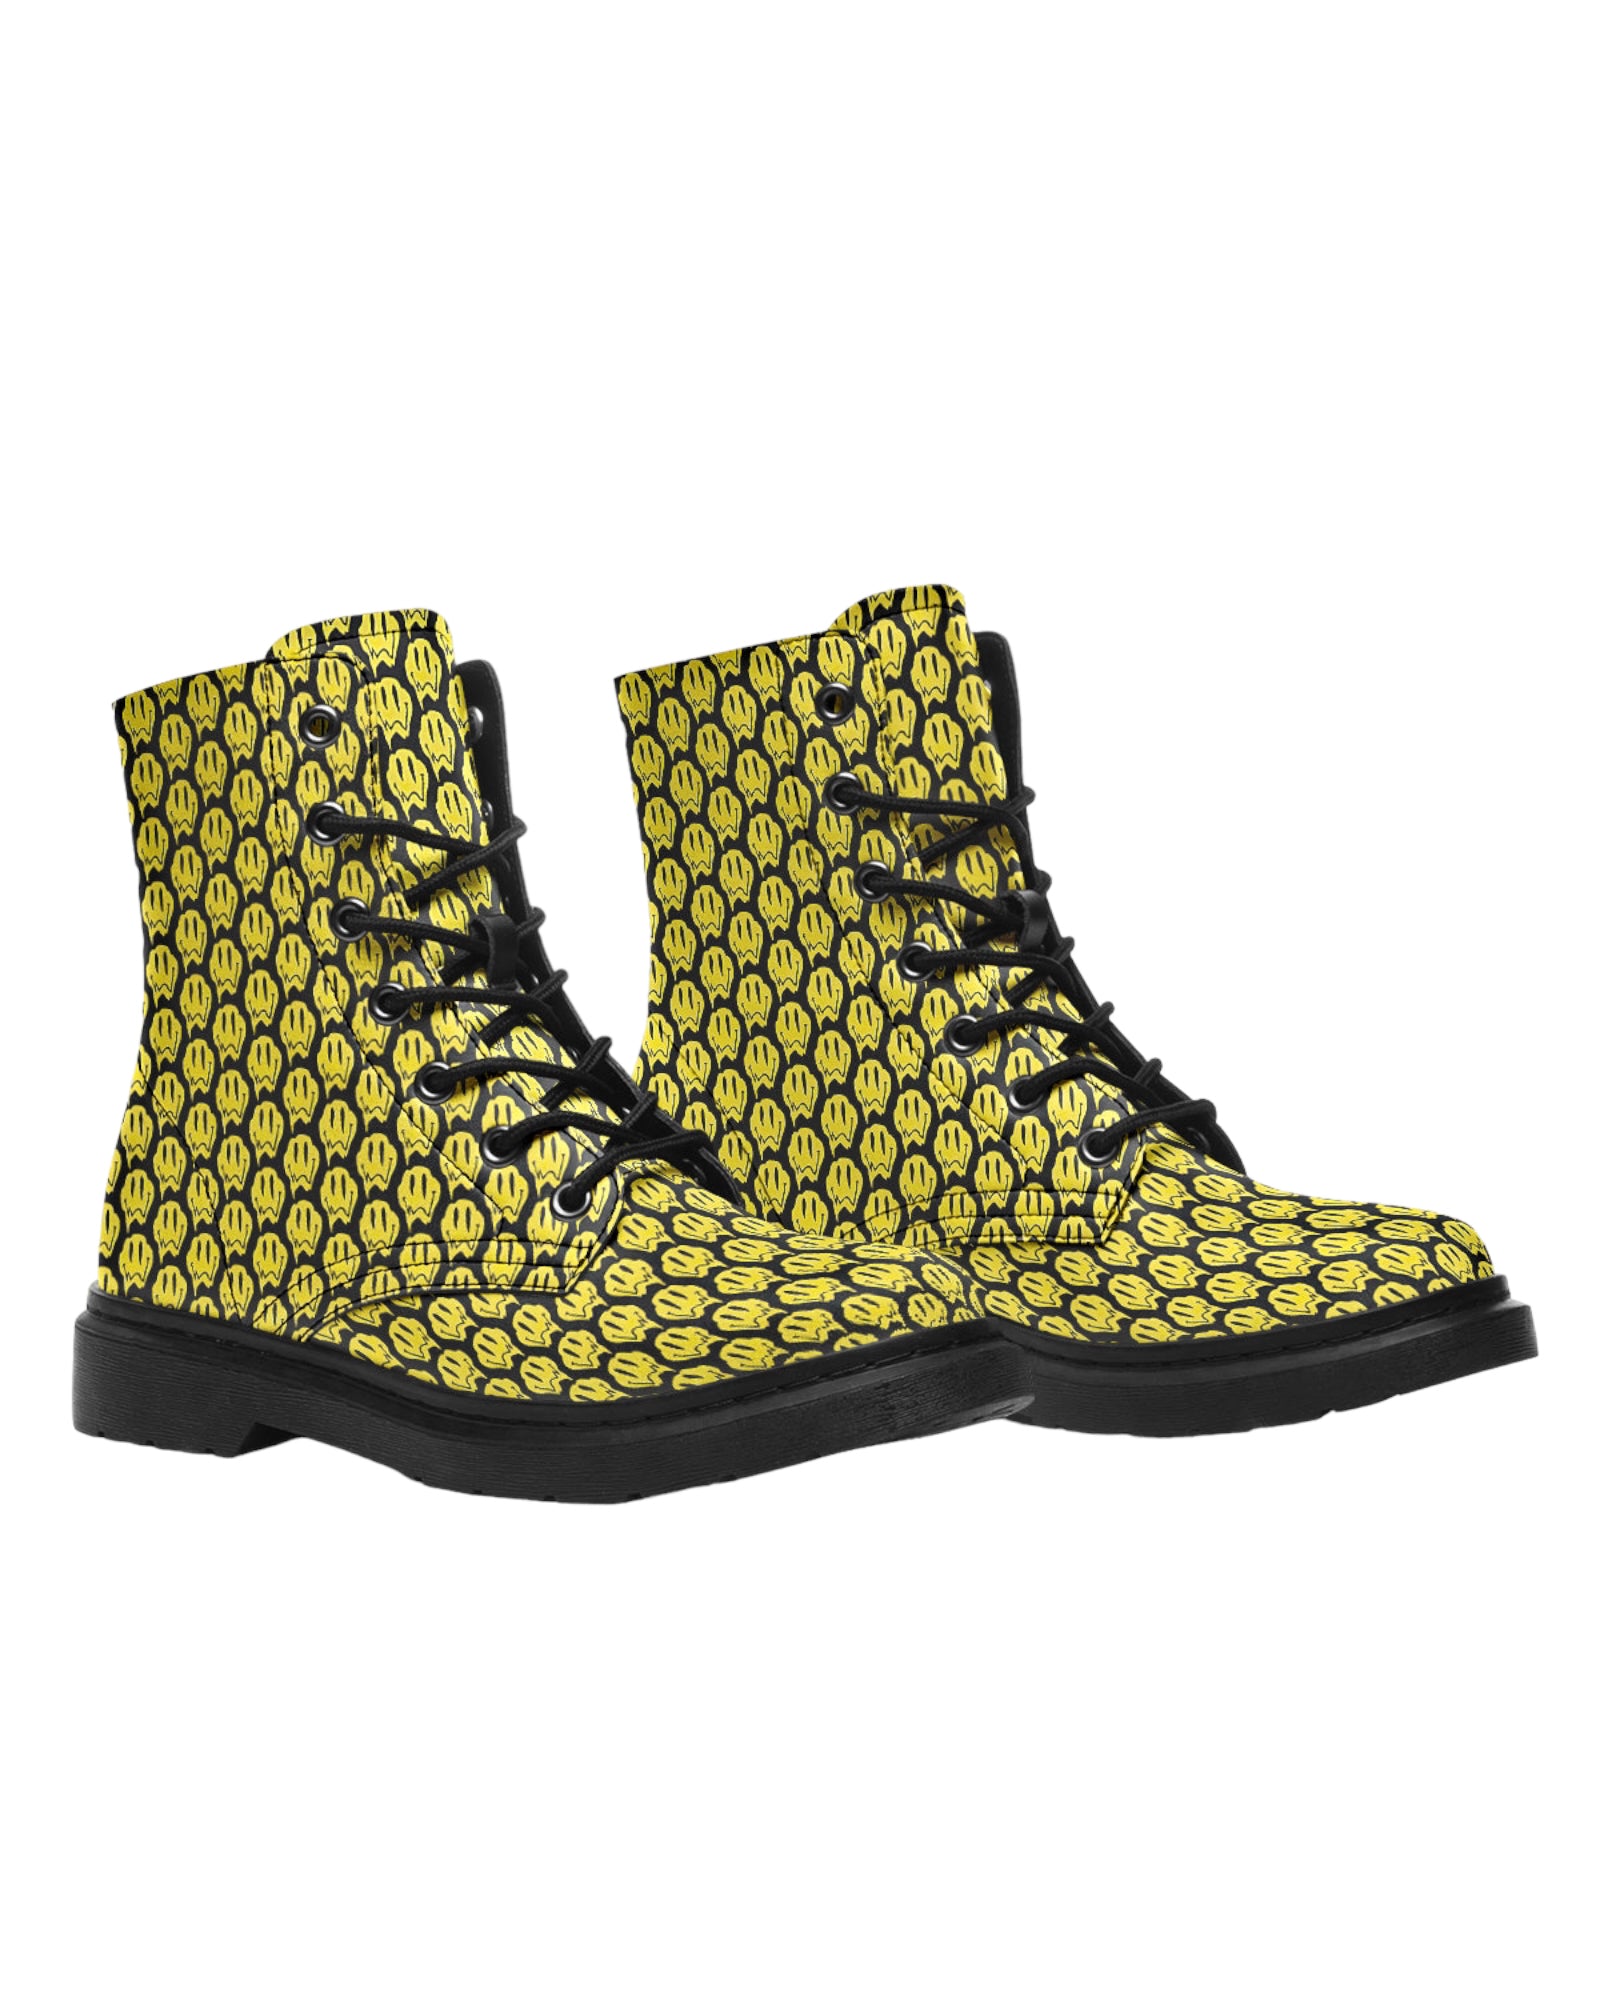 Stay Trippy Combat Festival Boots